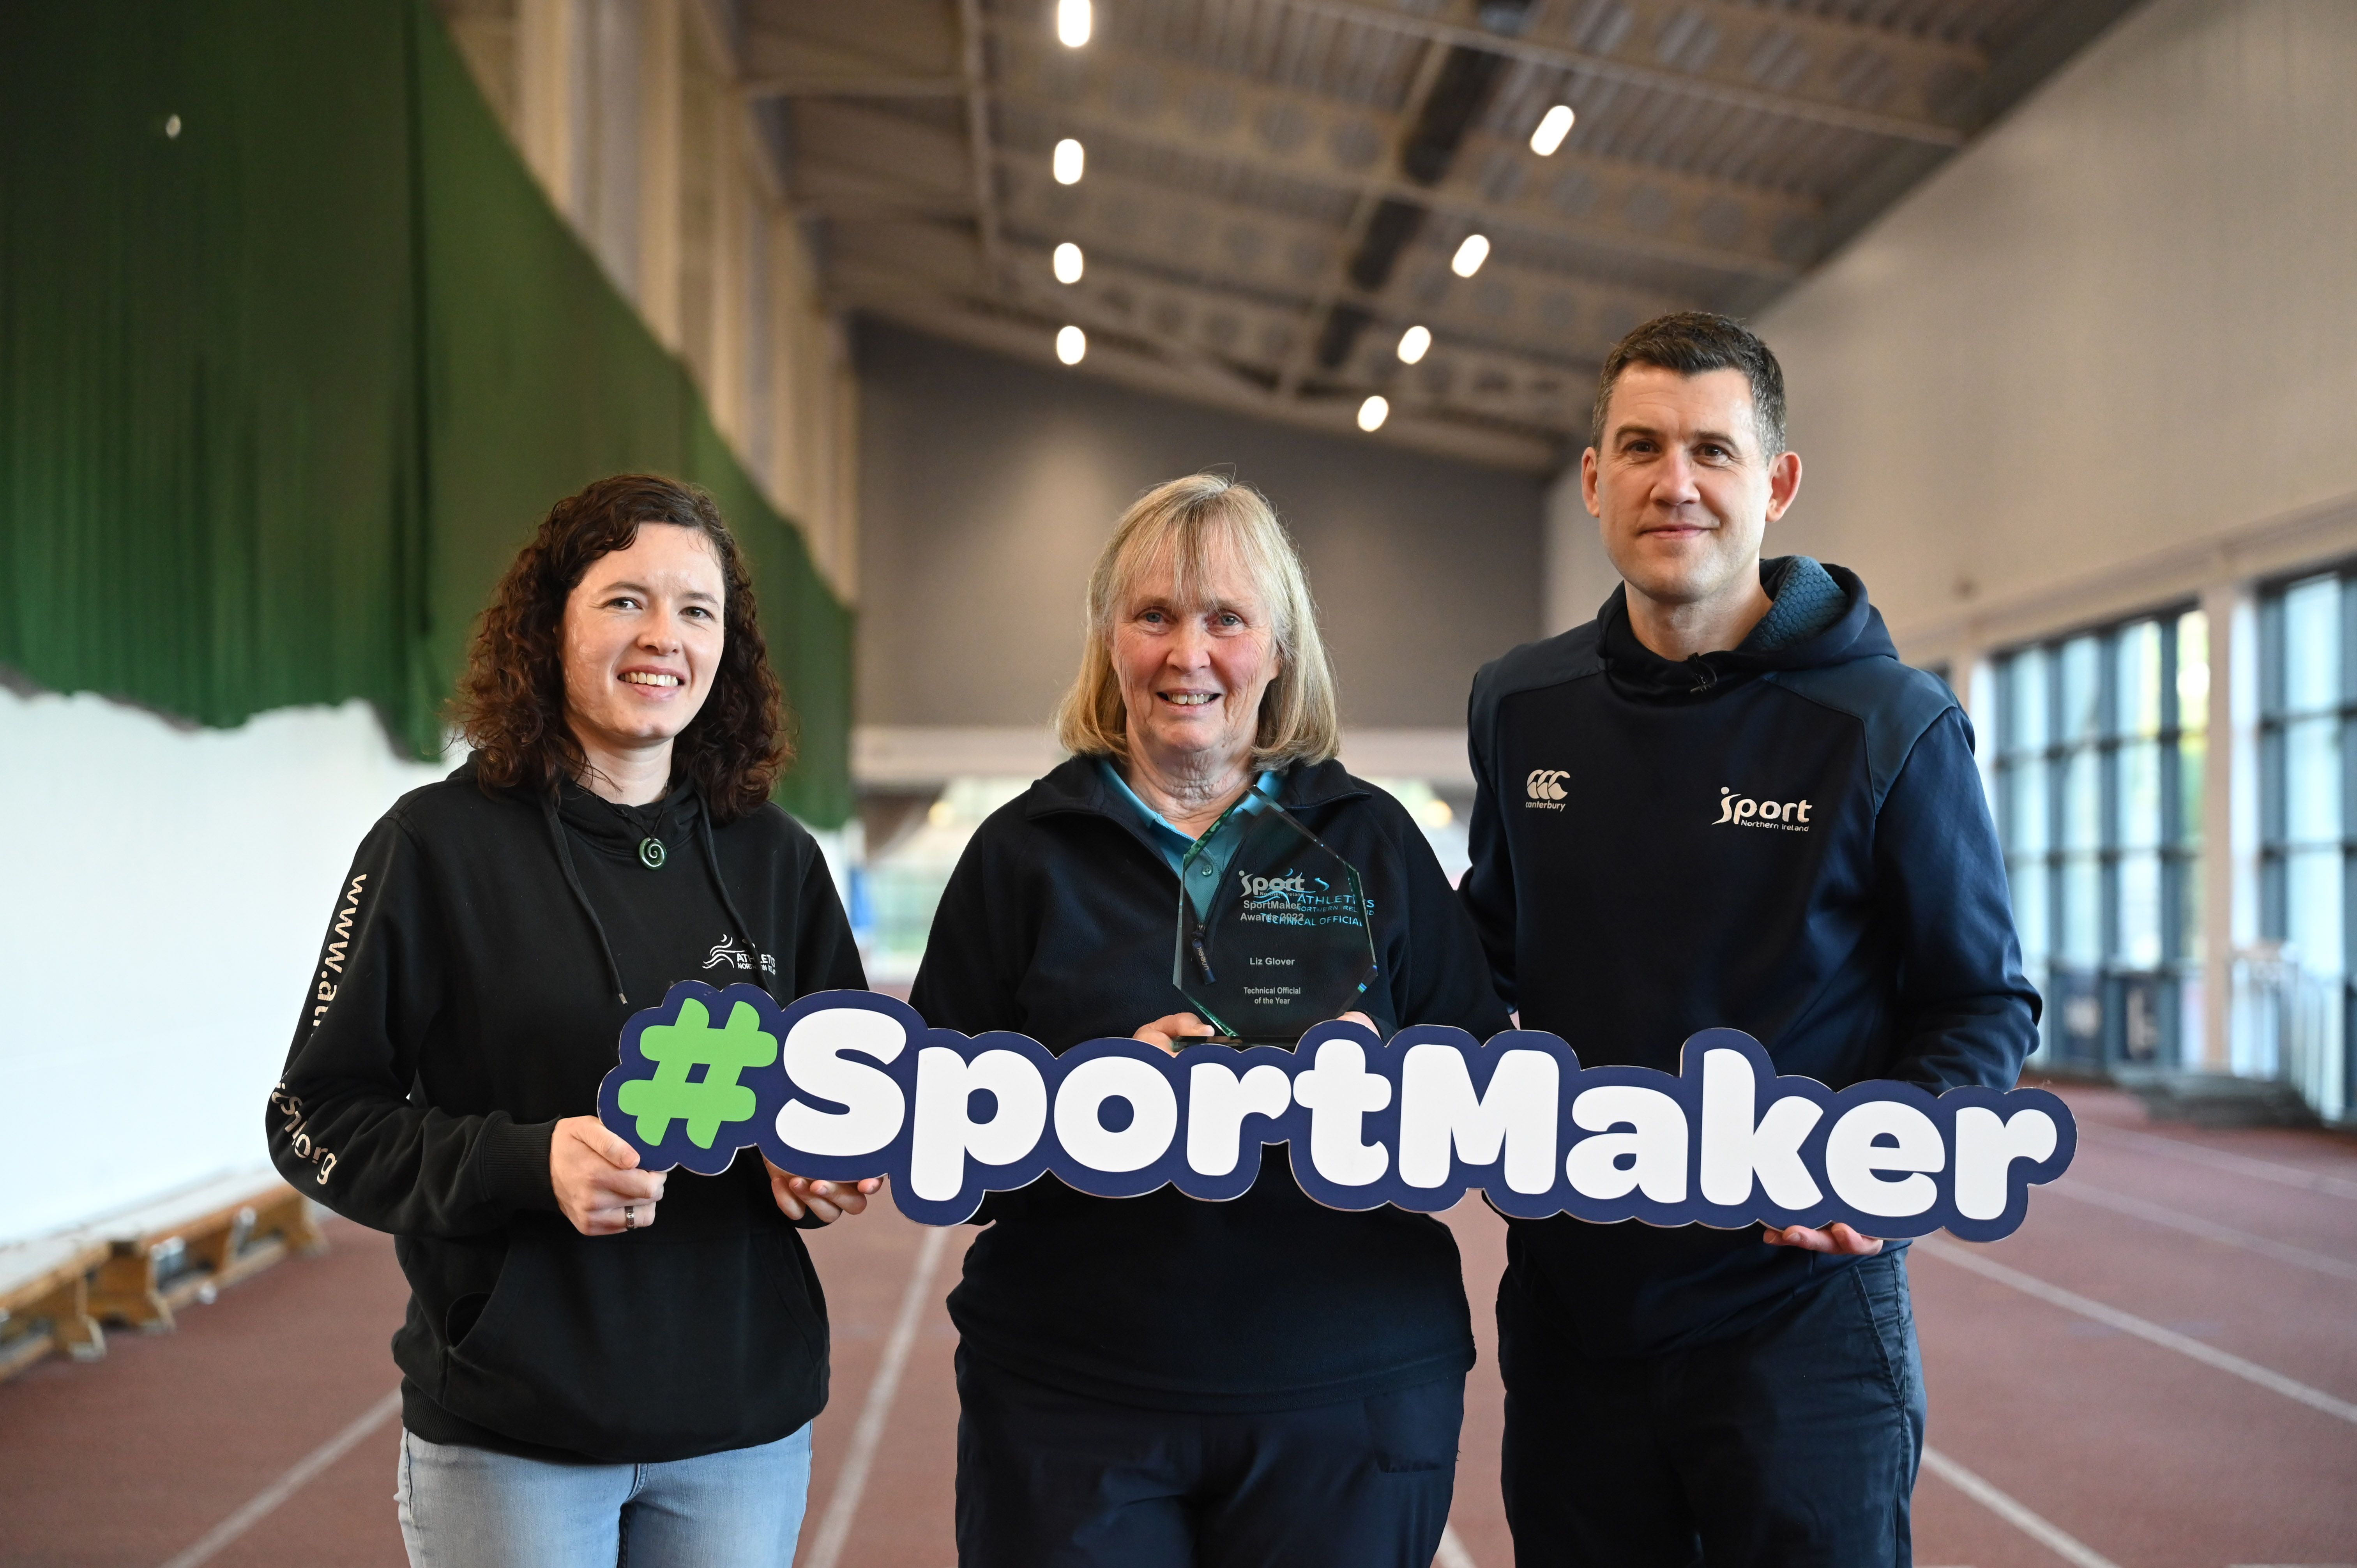 Shauna Bratten, Marketing and Communications and Events Manager at Athletics NI with Technical Official of the Year Liz Glover and Sport NI representative David Smyth